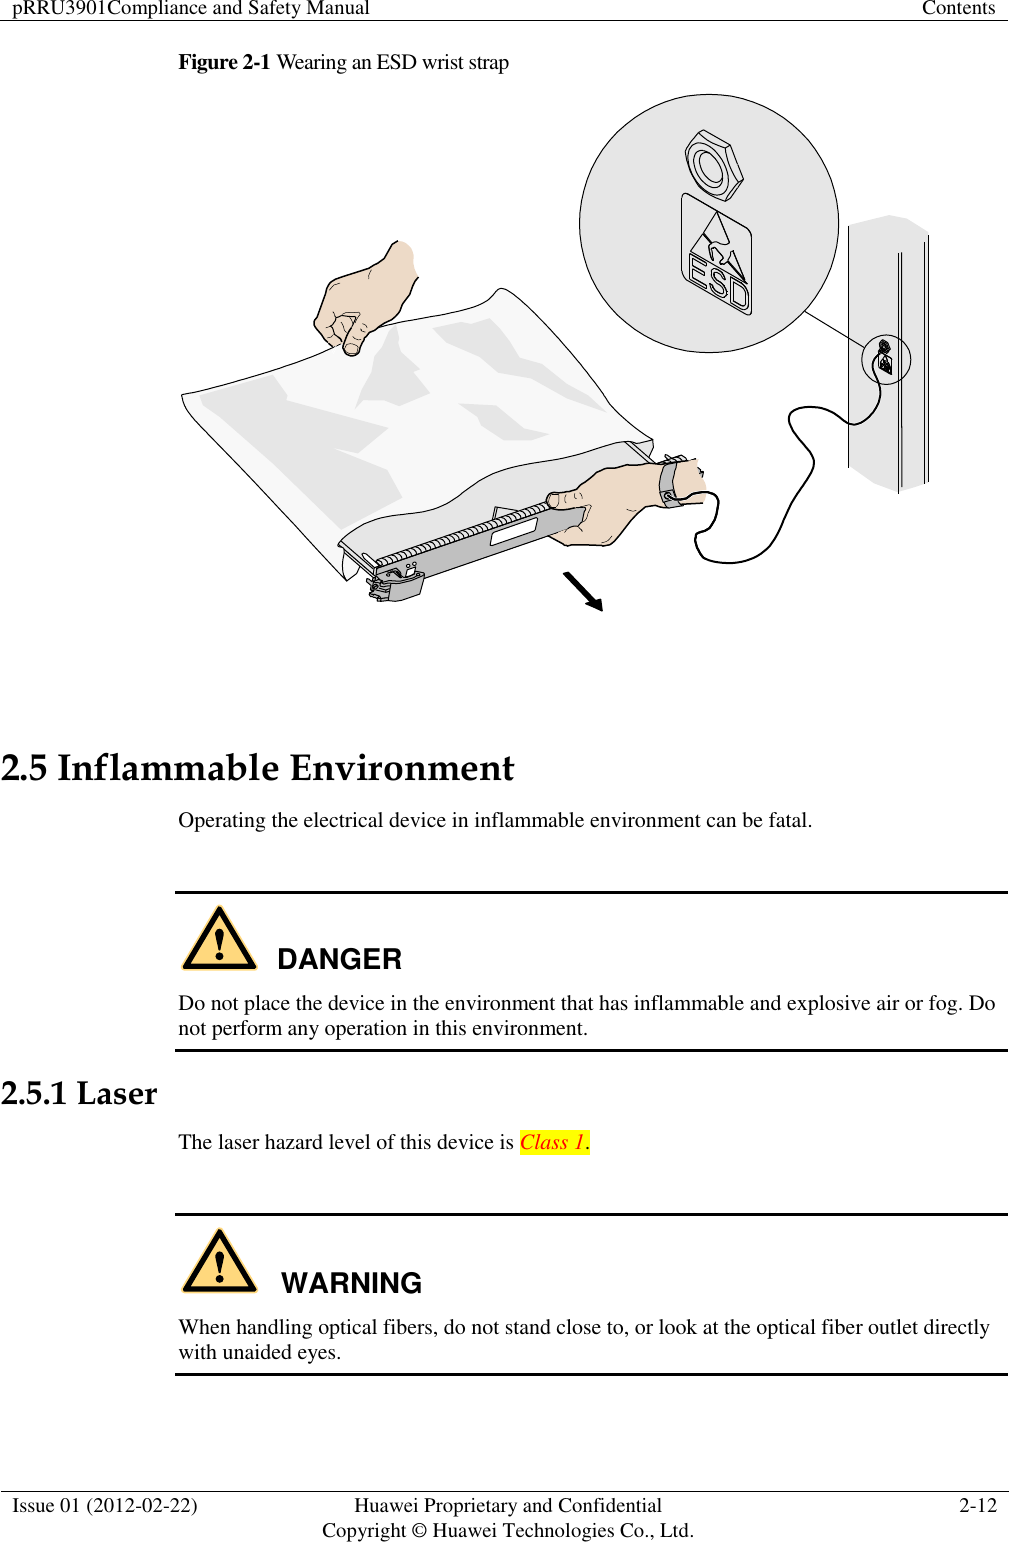 pRRU3901Compliance and Safety Manual Contents  Issue 01 (2012-02-22) Huawei Proprietary and Confidential           Copyright © Huawei Technologies Co., Ltd. 2-12  Figure 2-1 Wearing an ESD wrist strap   2.5 Inflammable Environment Operating the electrical device in inflammable environment can be fatal.  DANGER Do not place the device in the environment that has inflammable and explosive air or fog. Do not perform any operation in this environment. 2.5.1 Laser The laser hazard level of this device is Class 1.  WARNING When handling optical fibers, do not stand close to, or look at the optical fiber outlet directly with unaided eyes. 